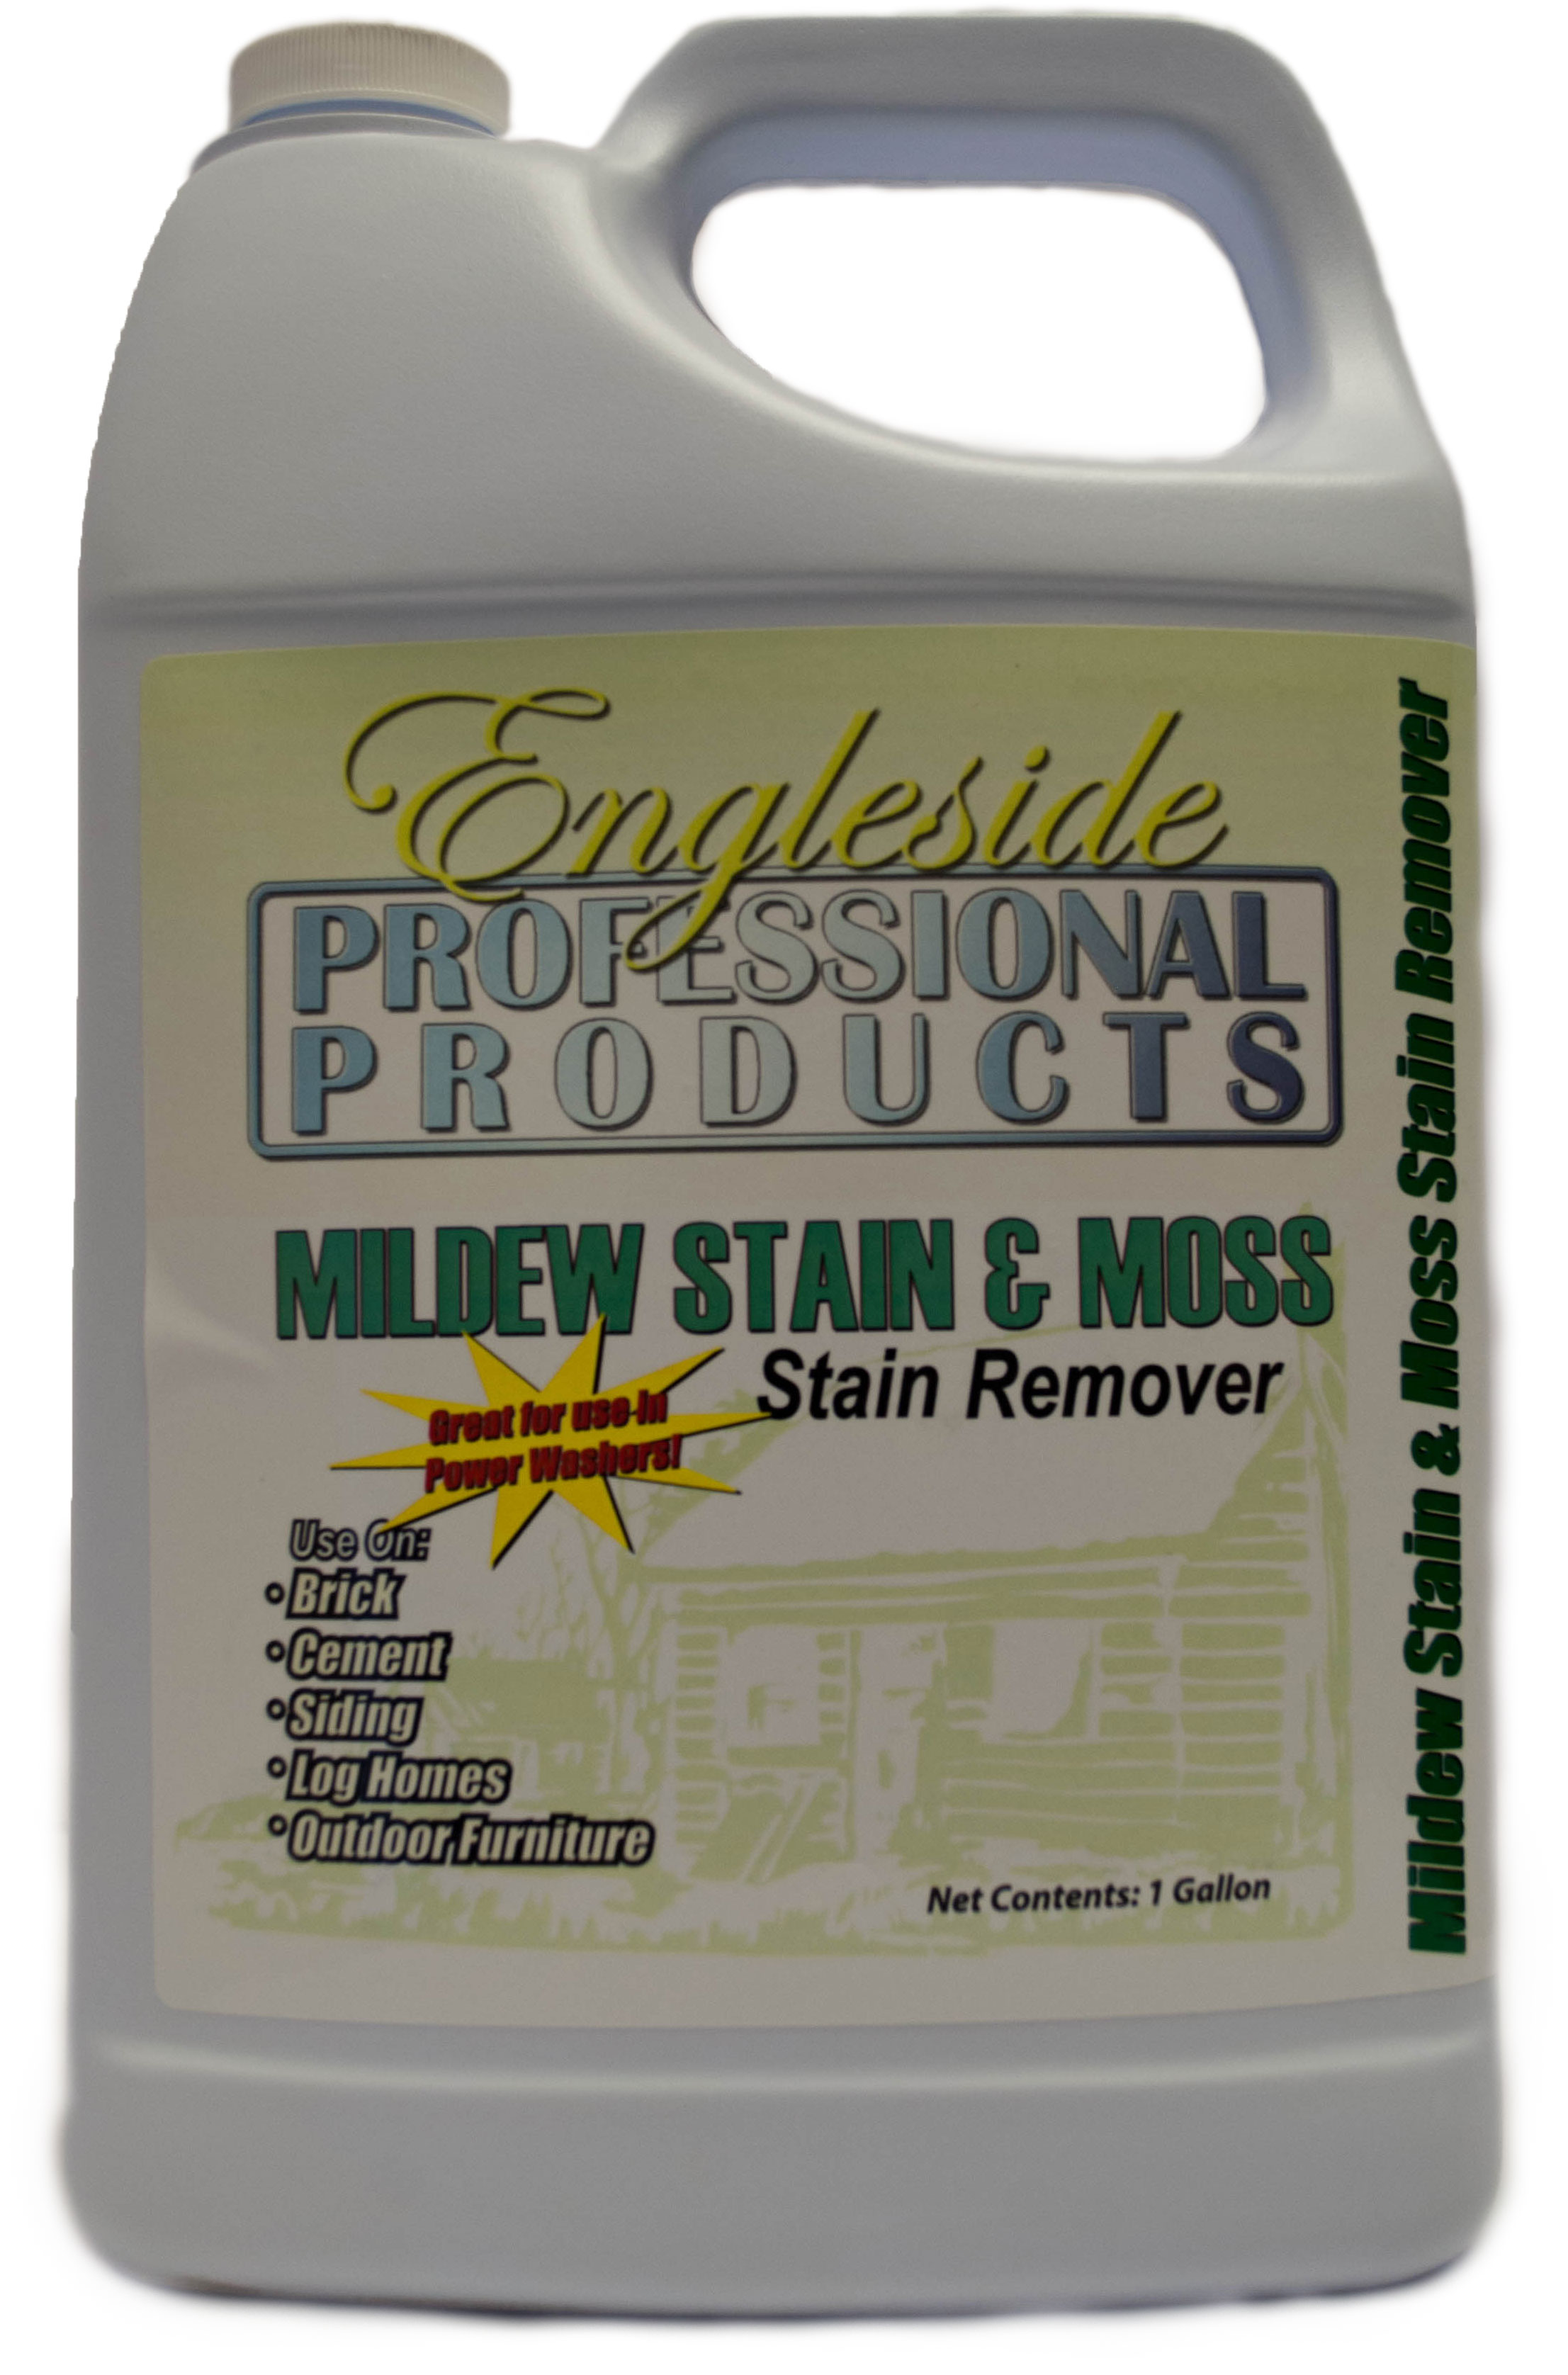 Professional Mildew Stain And Moss Stain Remover